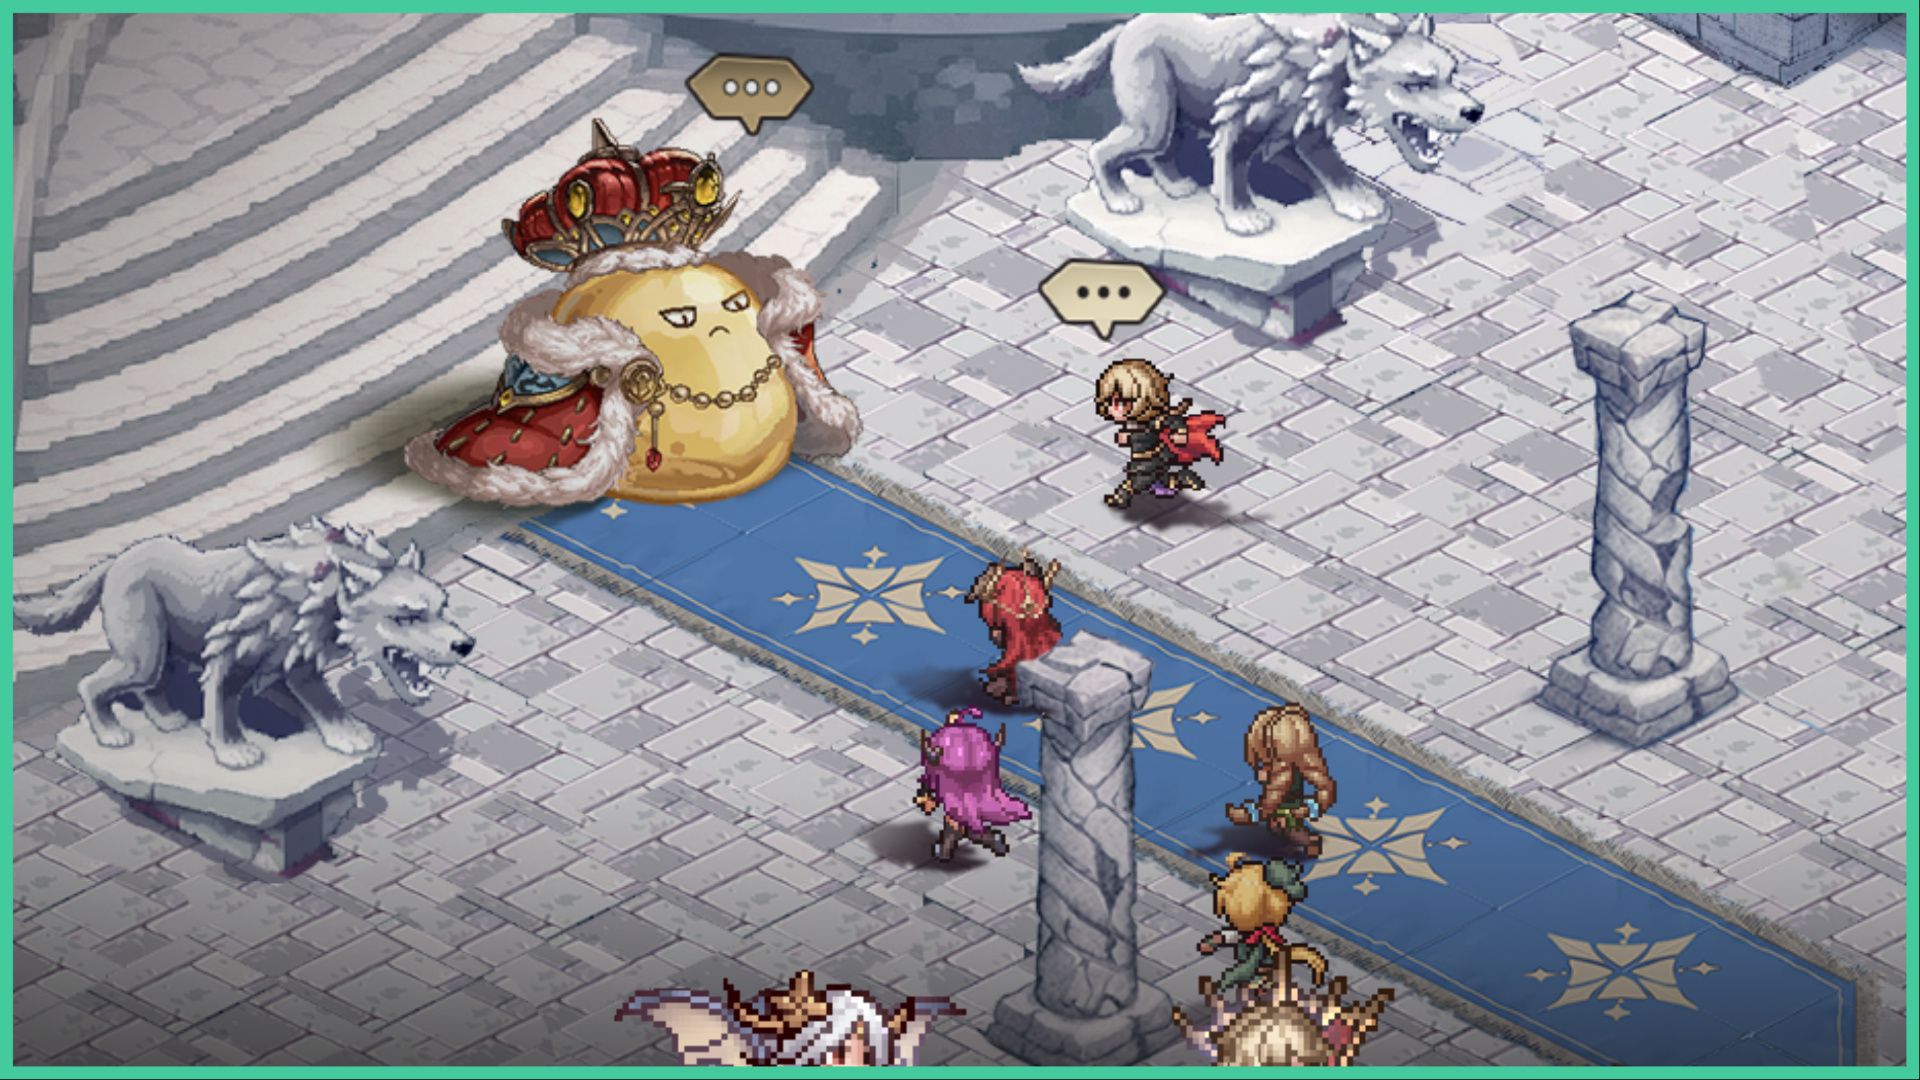 feature image for our endless grades tier list, the image features a screenshot of some characters inside a stone castle approaching a giant slime that is dressed like a king with a coat and crown with a stern expression on his face, there is a blue carpet across the floor as well as stone pillars and stone wolf sculptures with stone stairs behind the king slime